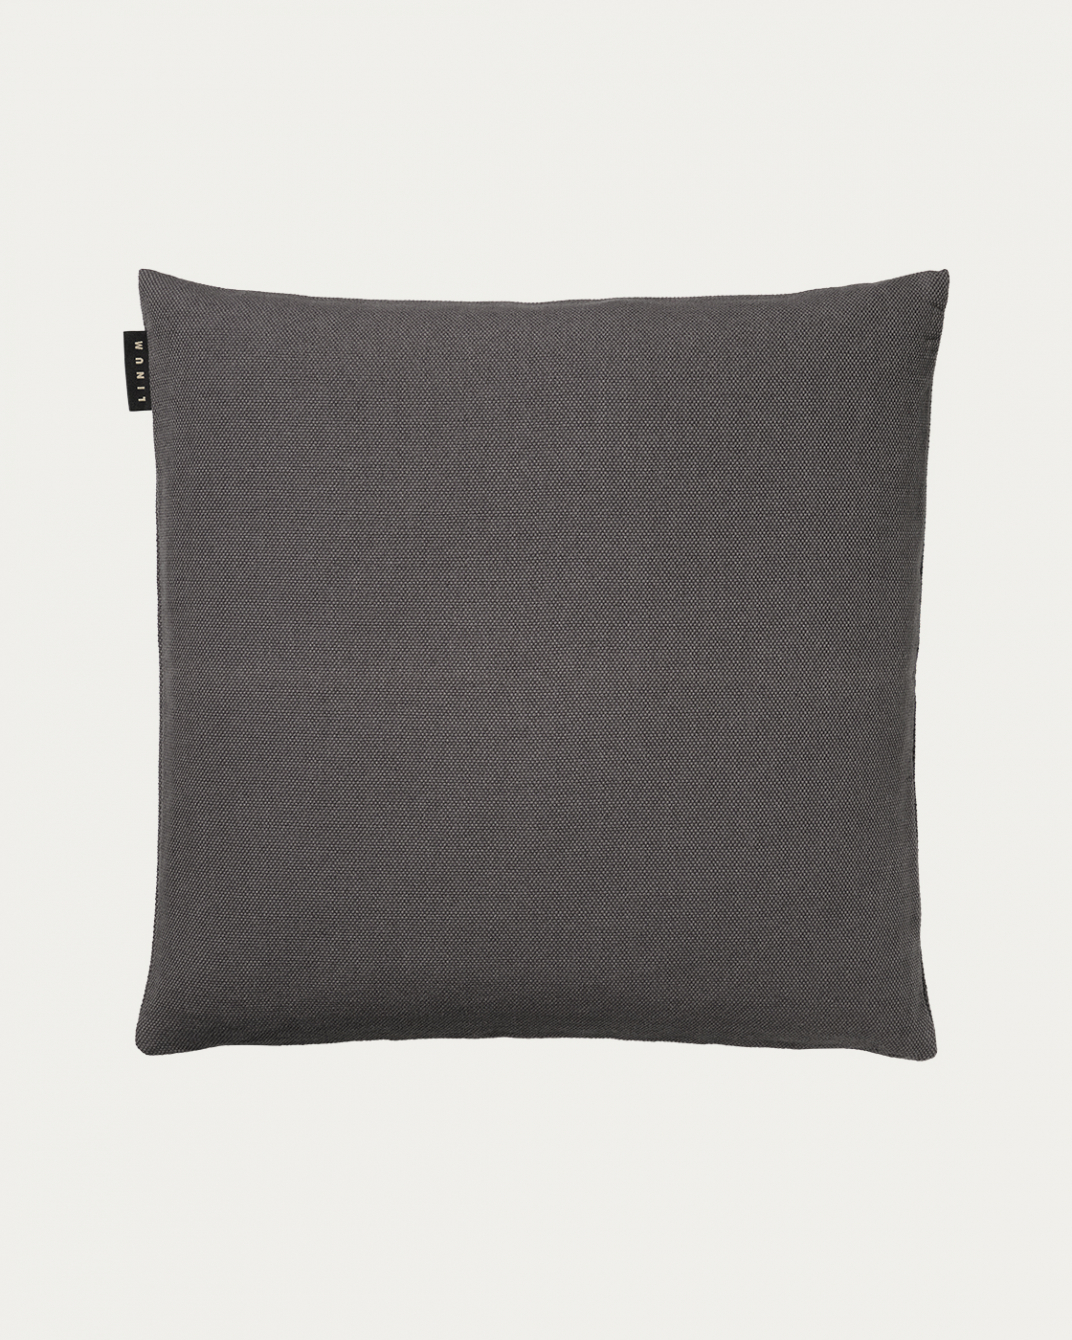 Product image granite grey PEPPER cushion cover made of soft cotton from LINUM DESIGN. Easy to wash and durable for generations. Size 50x50 cm.